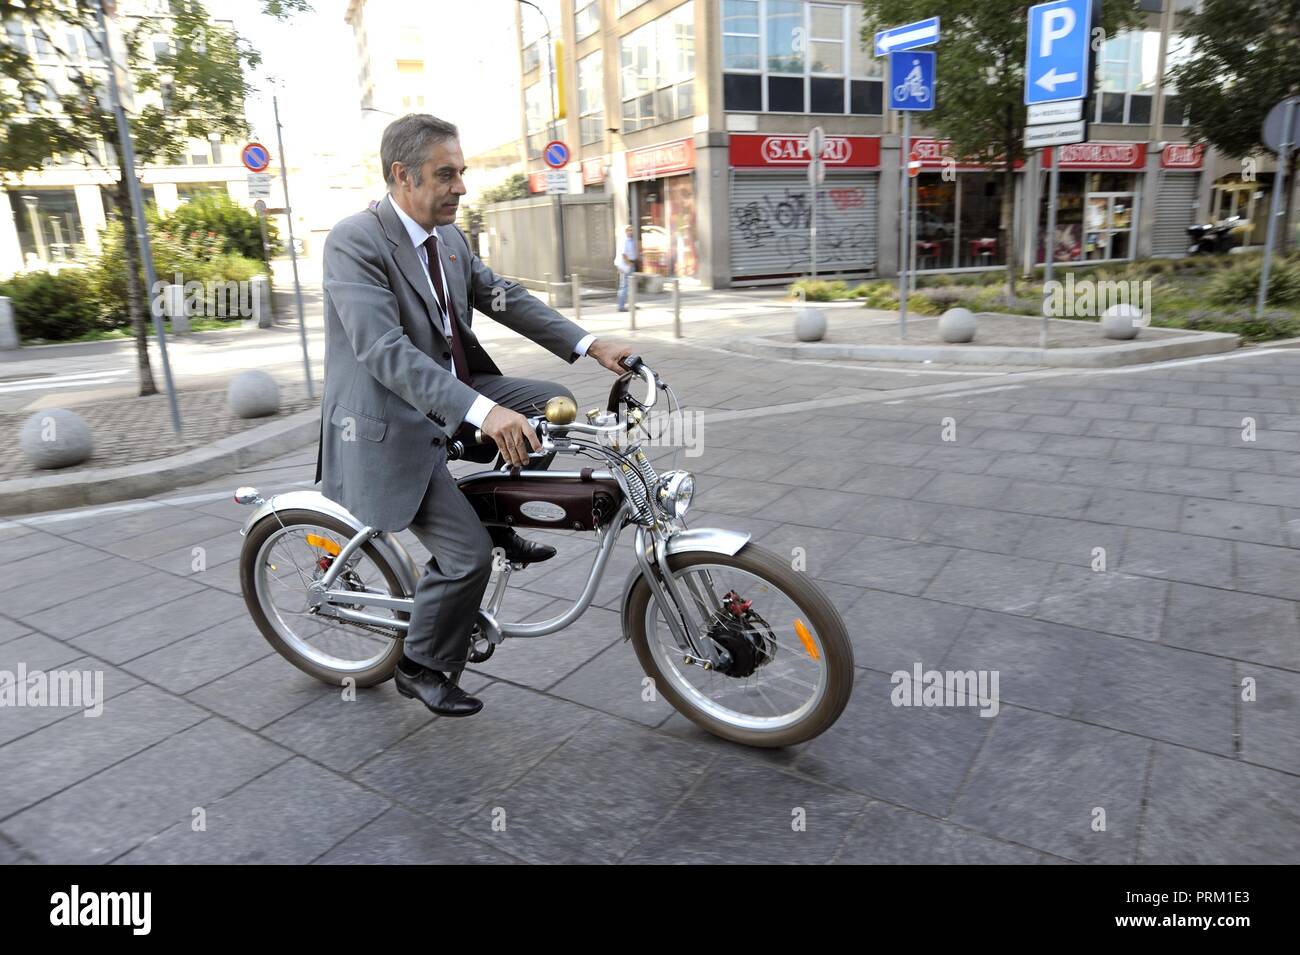 Milan (Italy), the first international meeting of electric vehicles 'E mob2018 is charging time!', 'vintage' Italjet electric bicycle Stock Photo